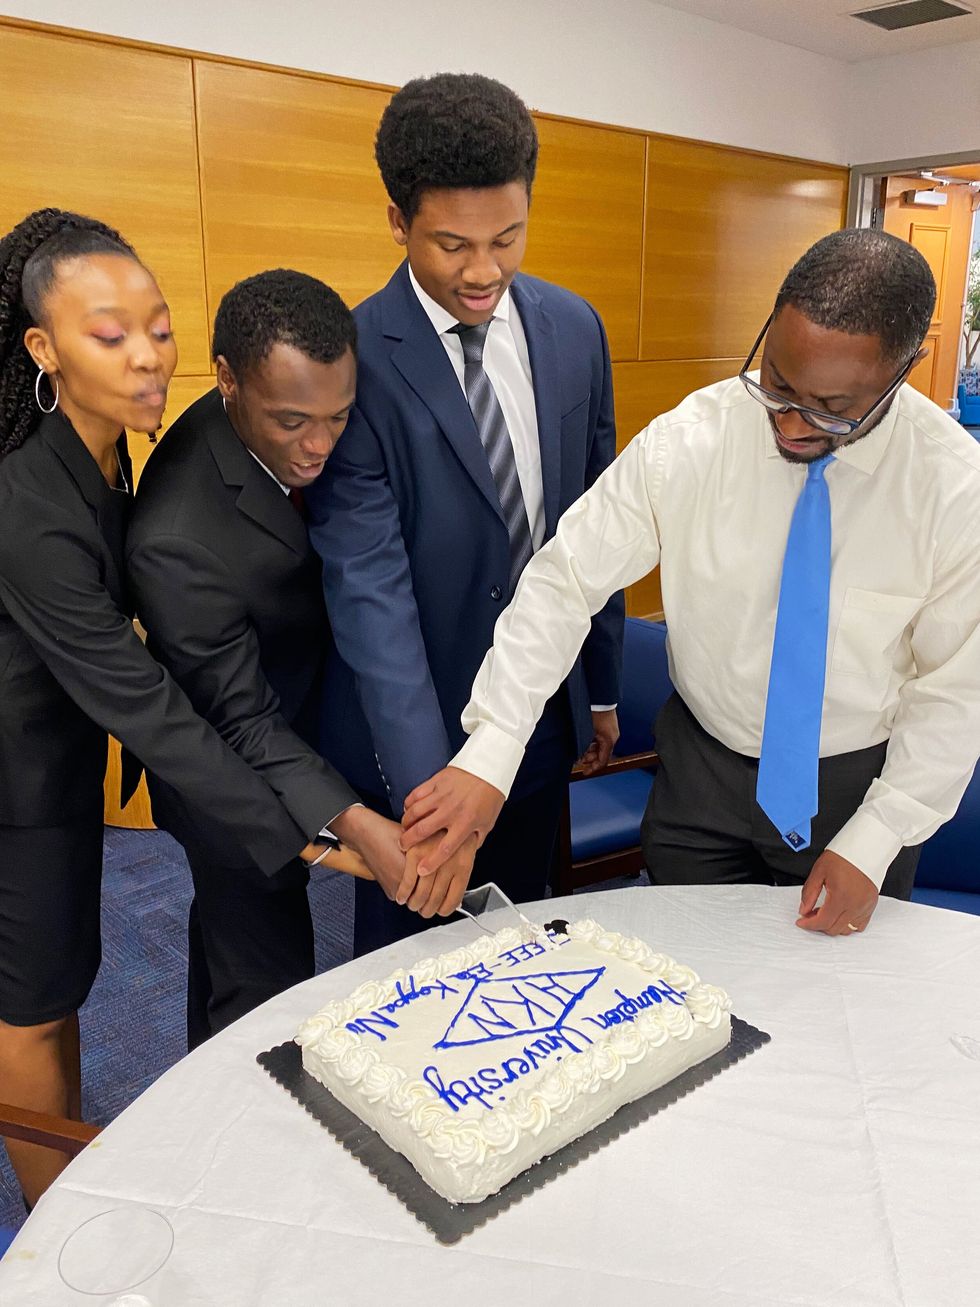 group of people holding onto knife and cutting into a white frosted cake with blue lettering